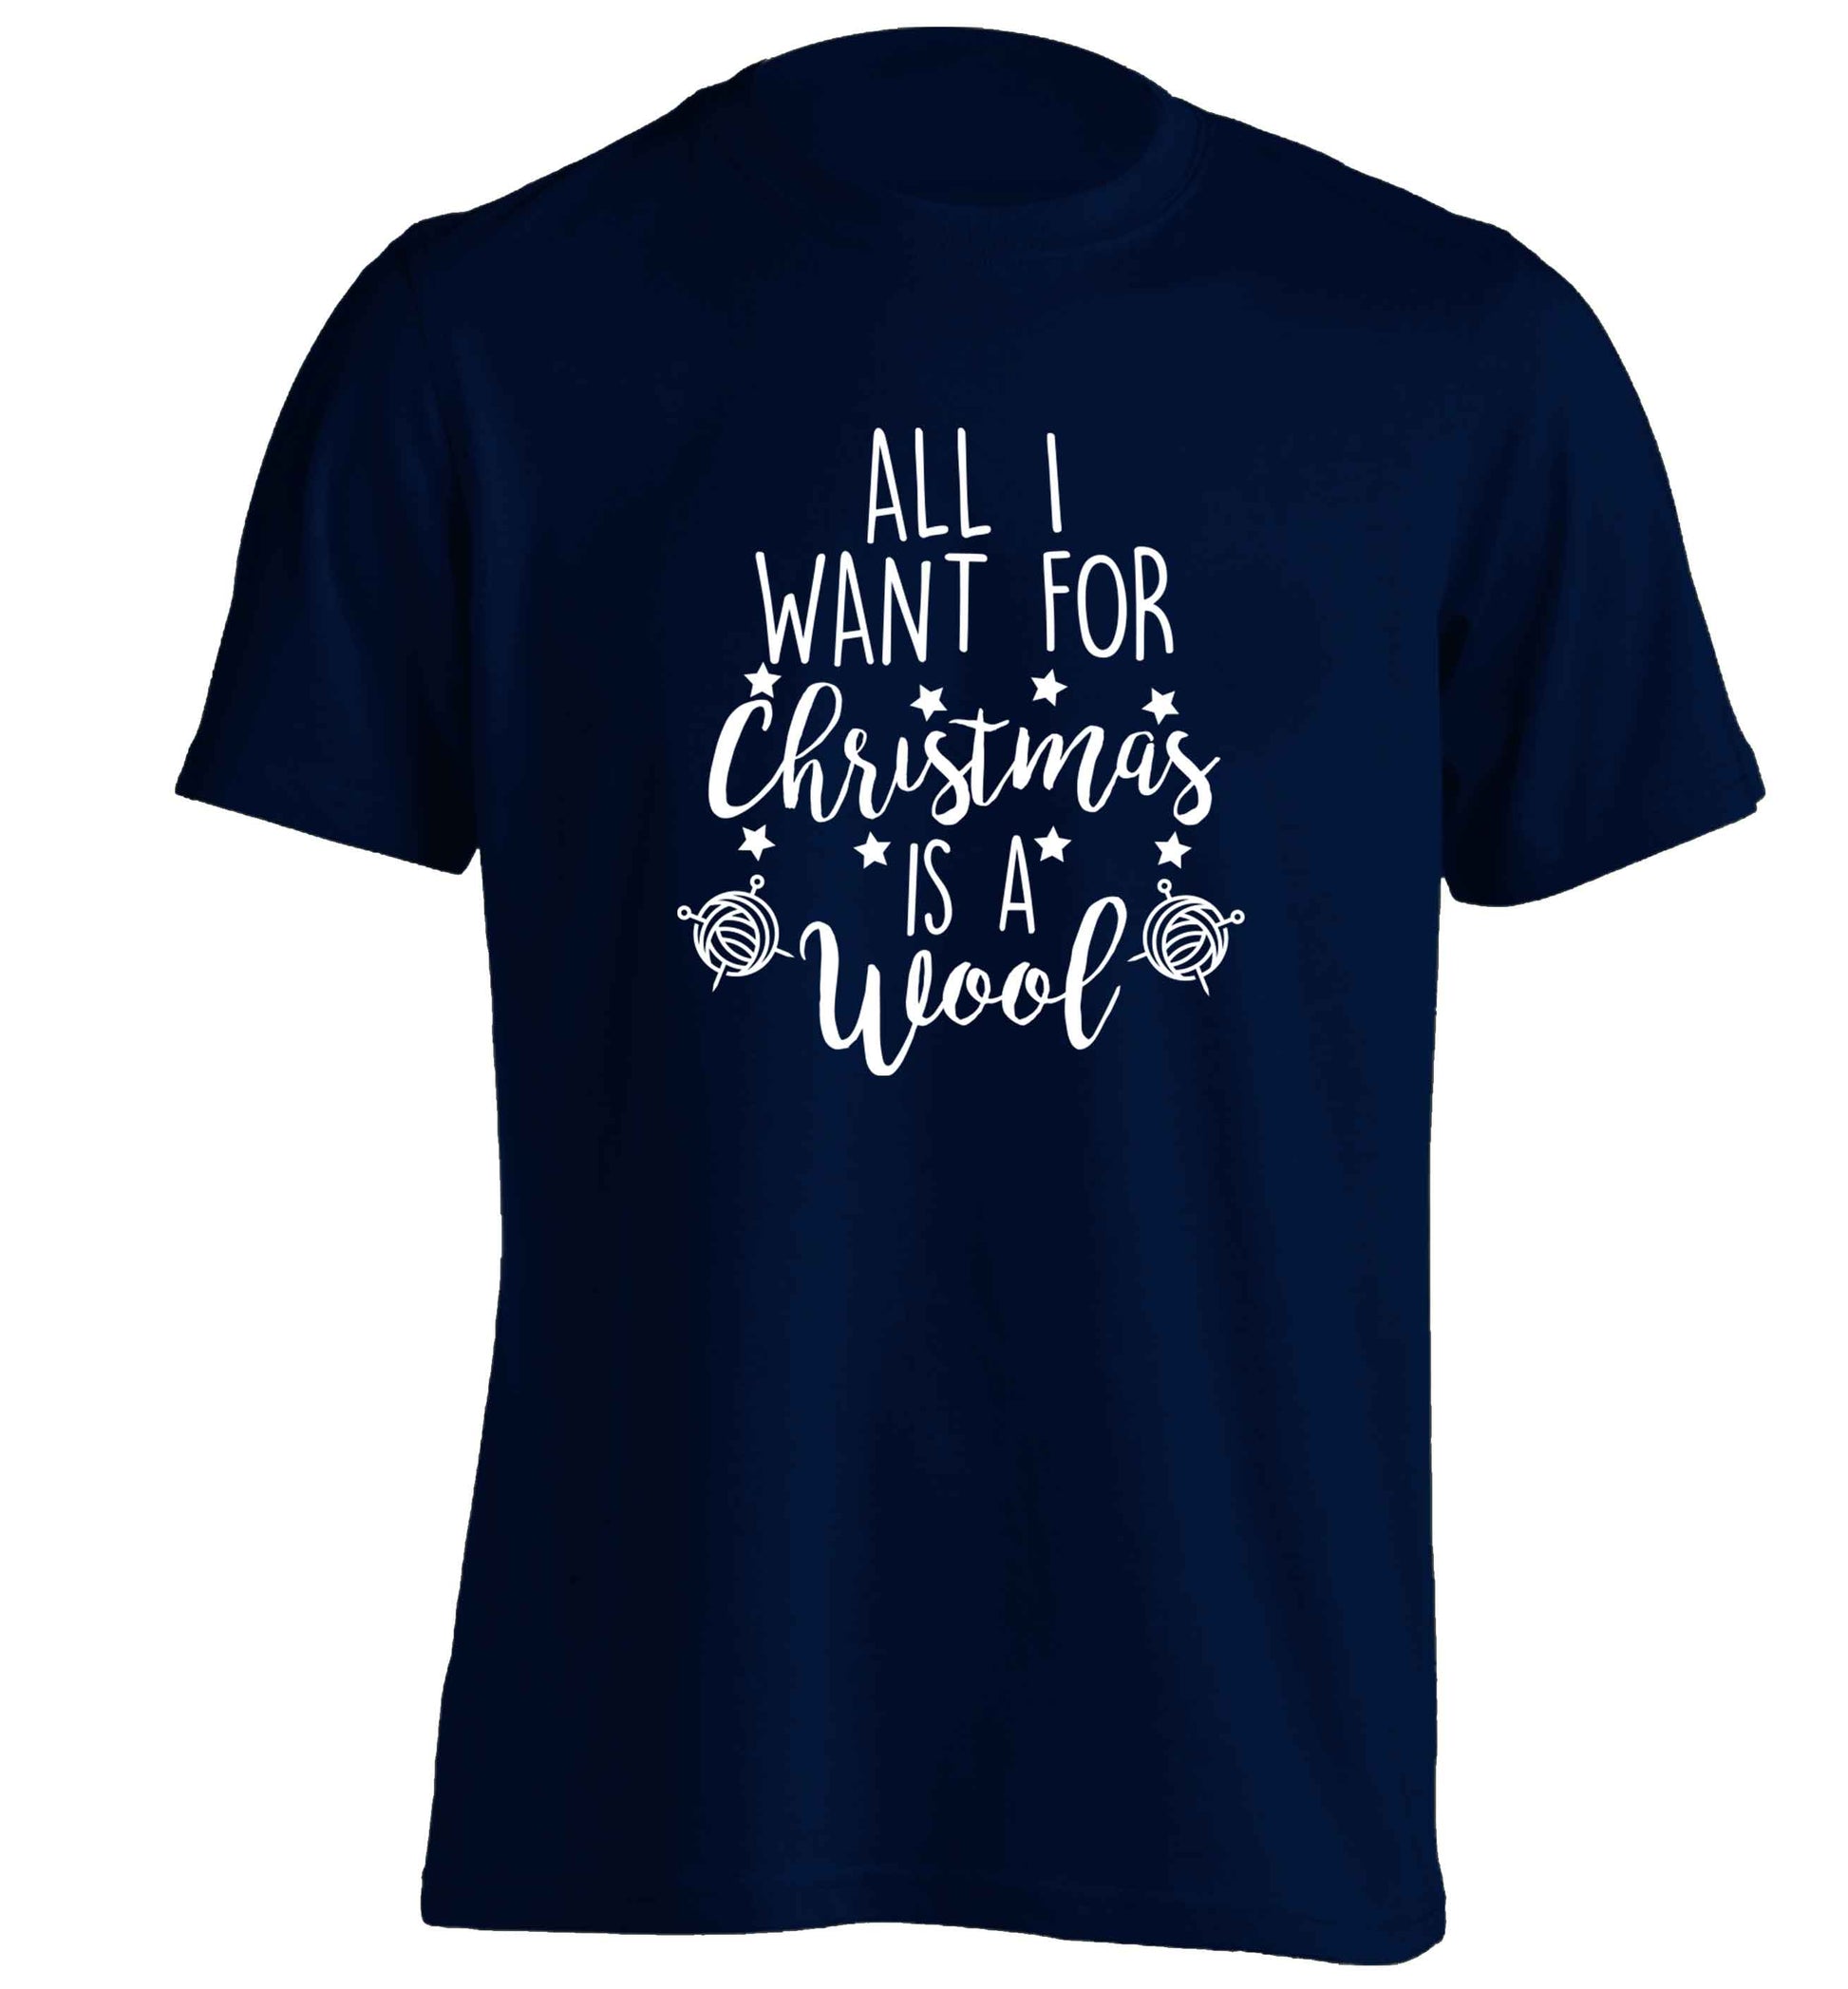 All I want for Christmas is wool! adults unisex navy Tshirt 2XL